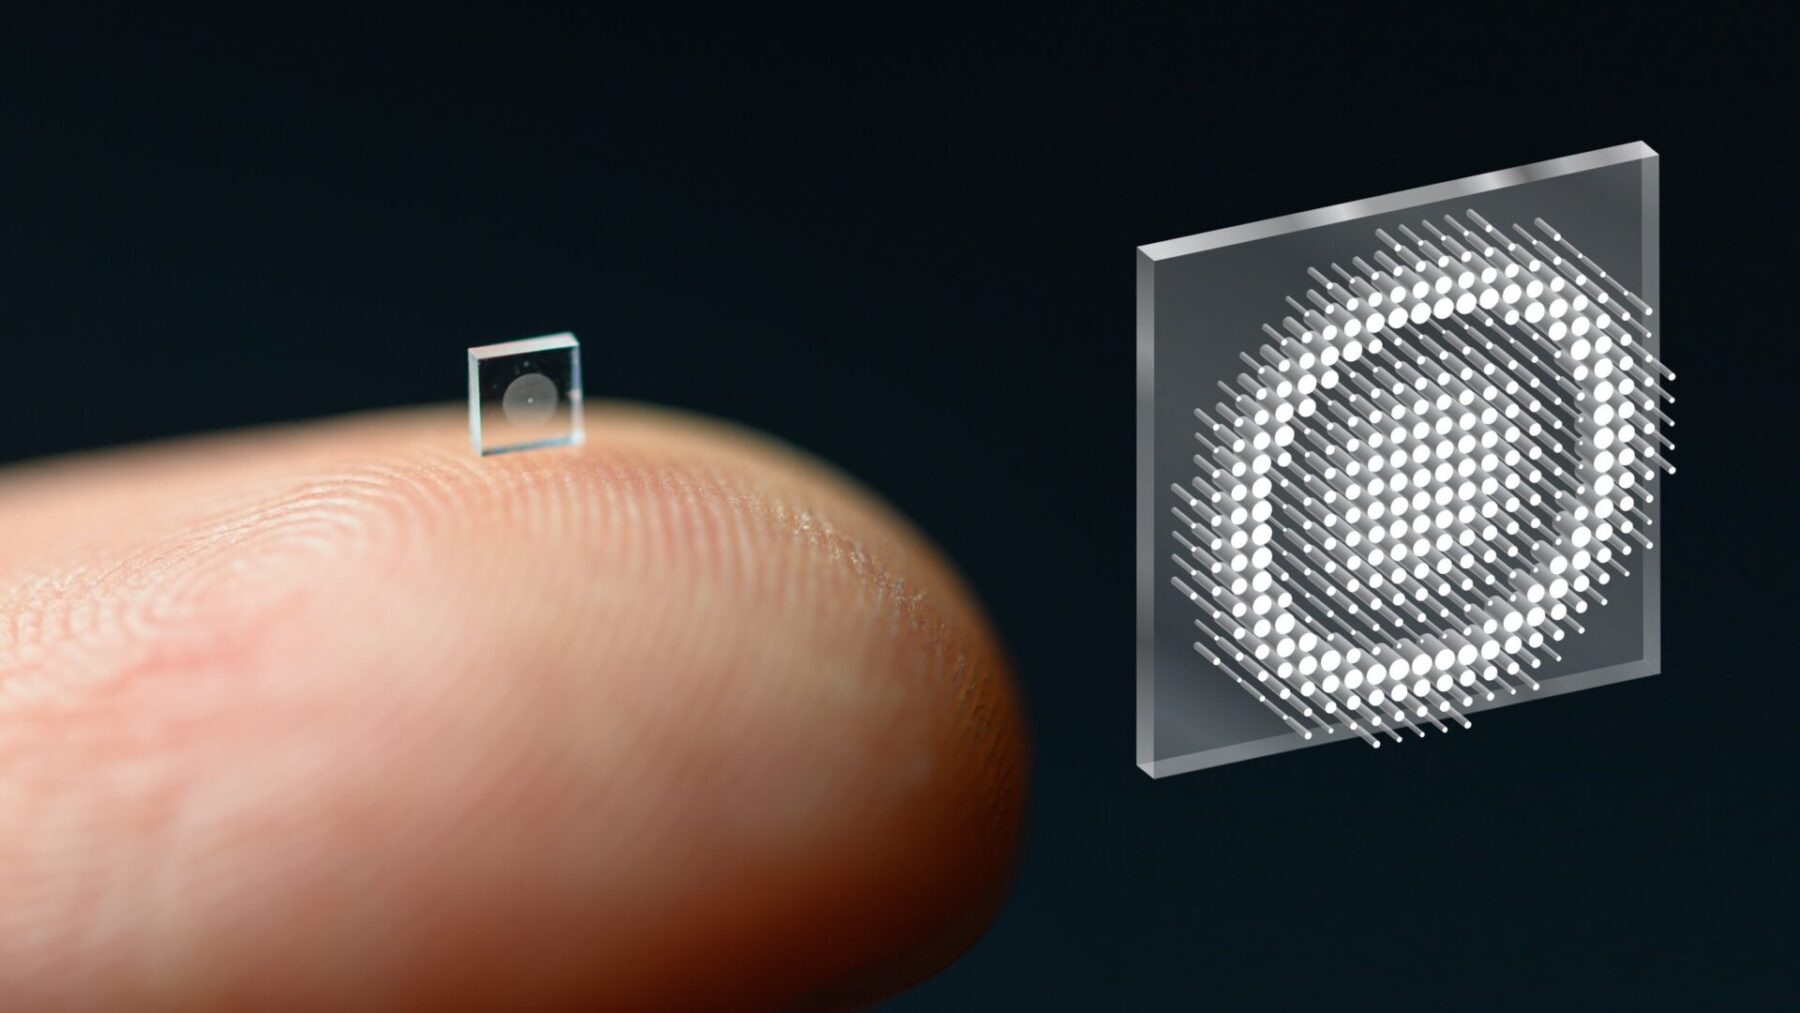 Researchers at Princeton University and the University of Washington have developed an ultracompact camera the size of a coarse grain of salt. The system relies on a technology called a metasurface, which is studded with 1.6 million cylindrical posts and can be produced much like a computer chip. Image courtesy of the researchers